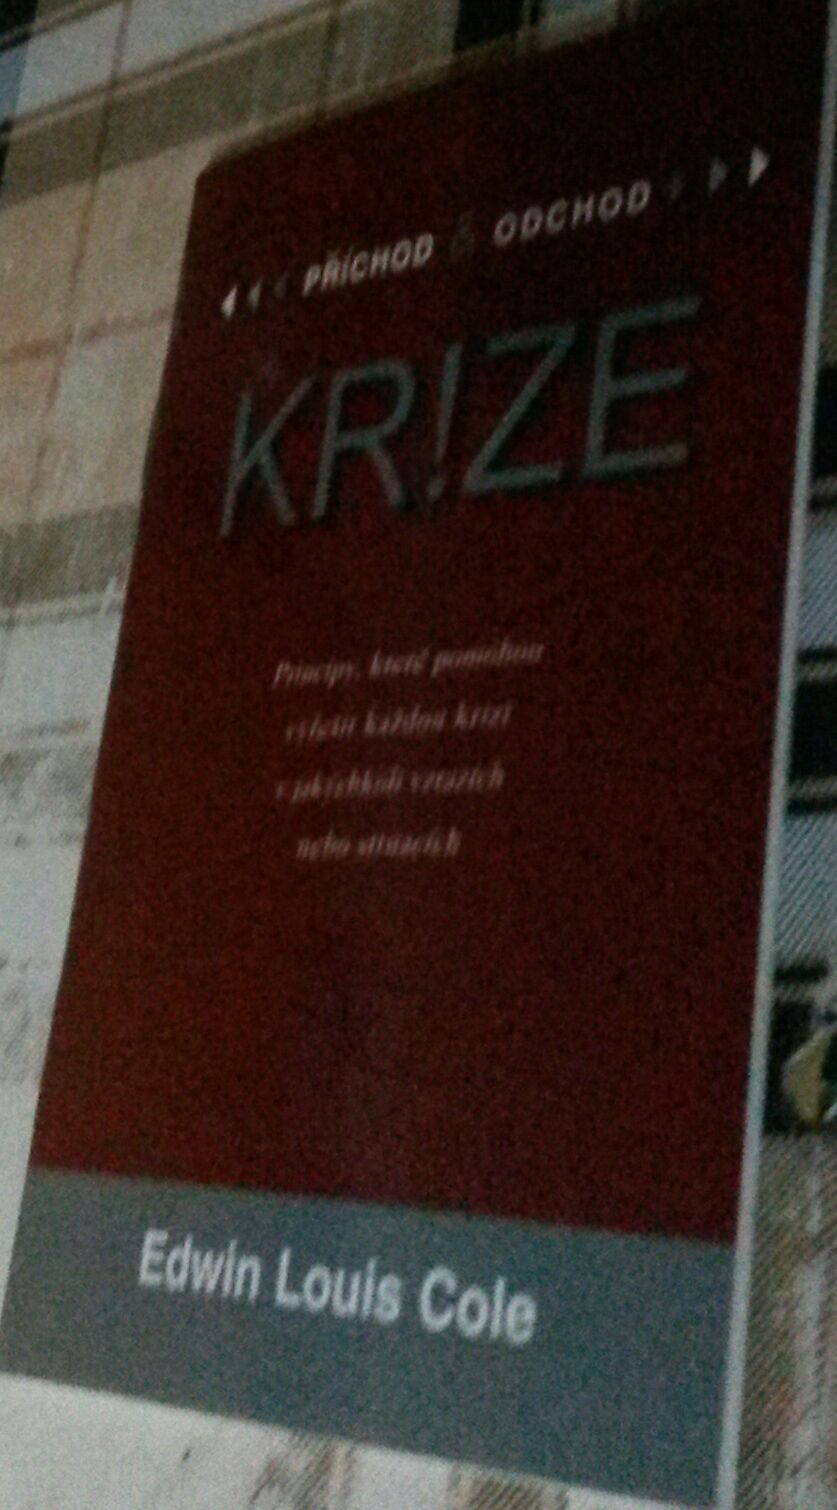 KRIZE